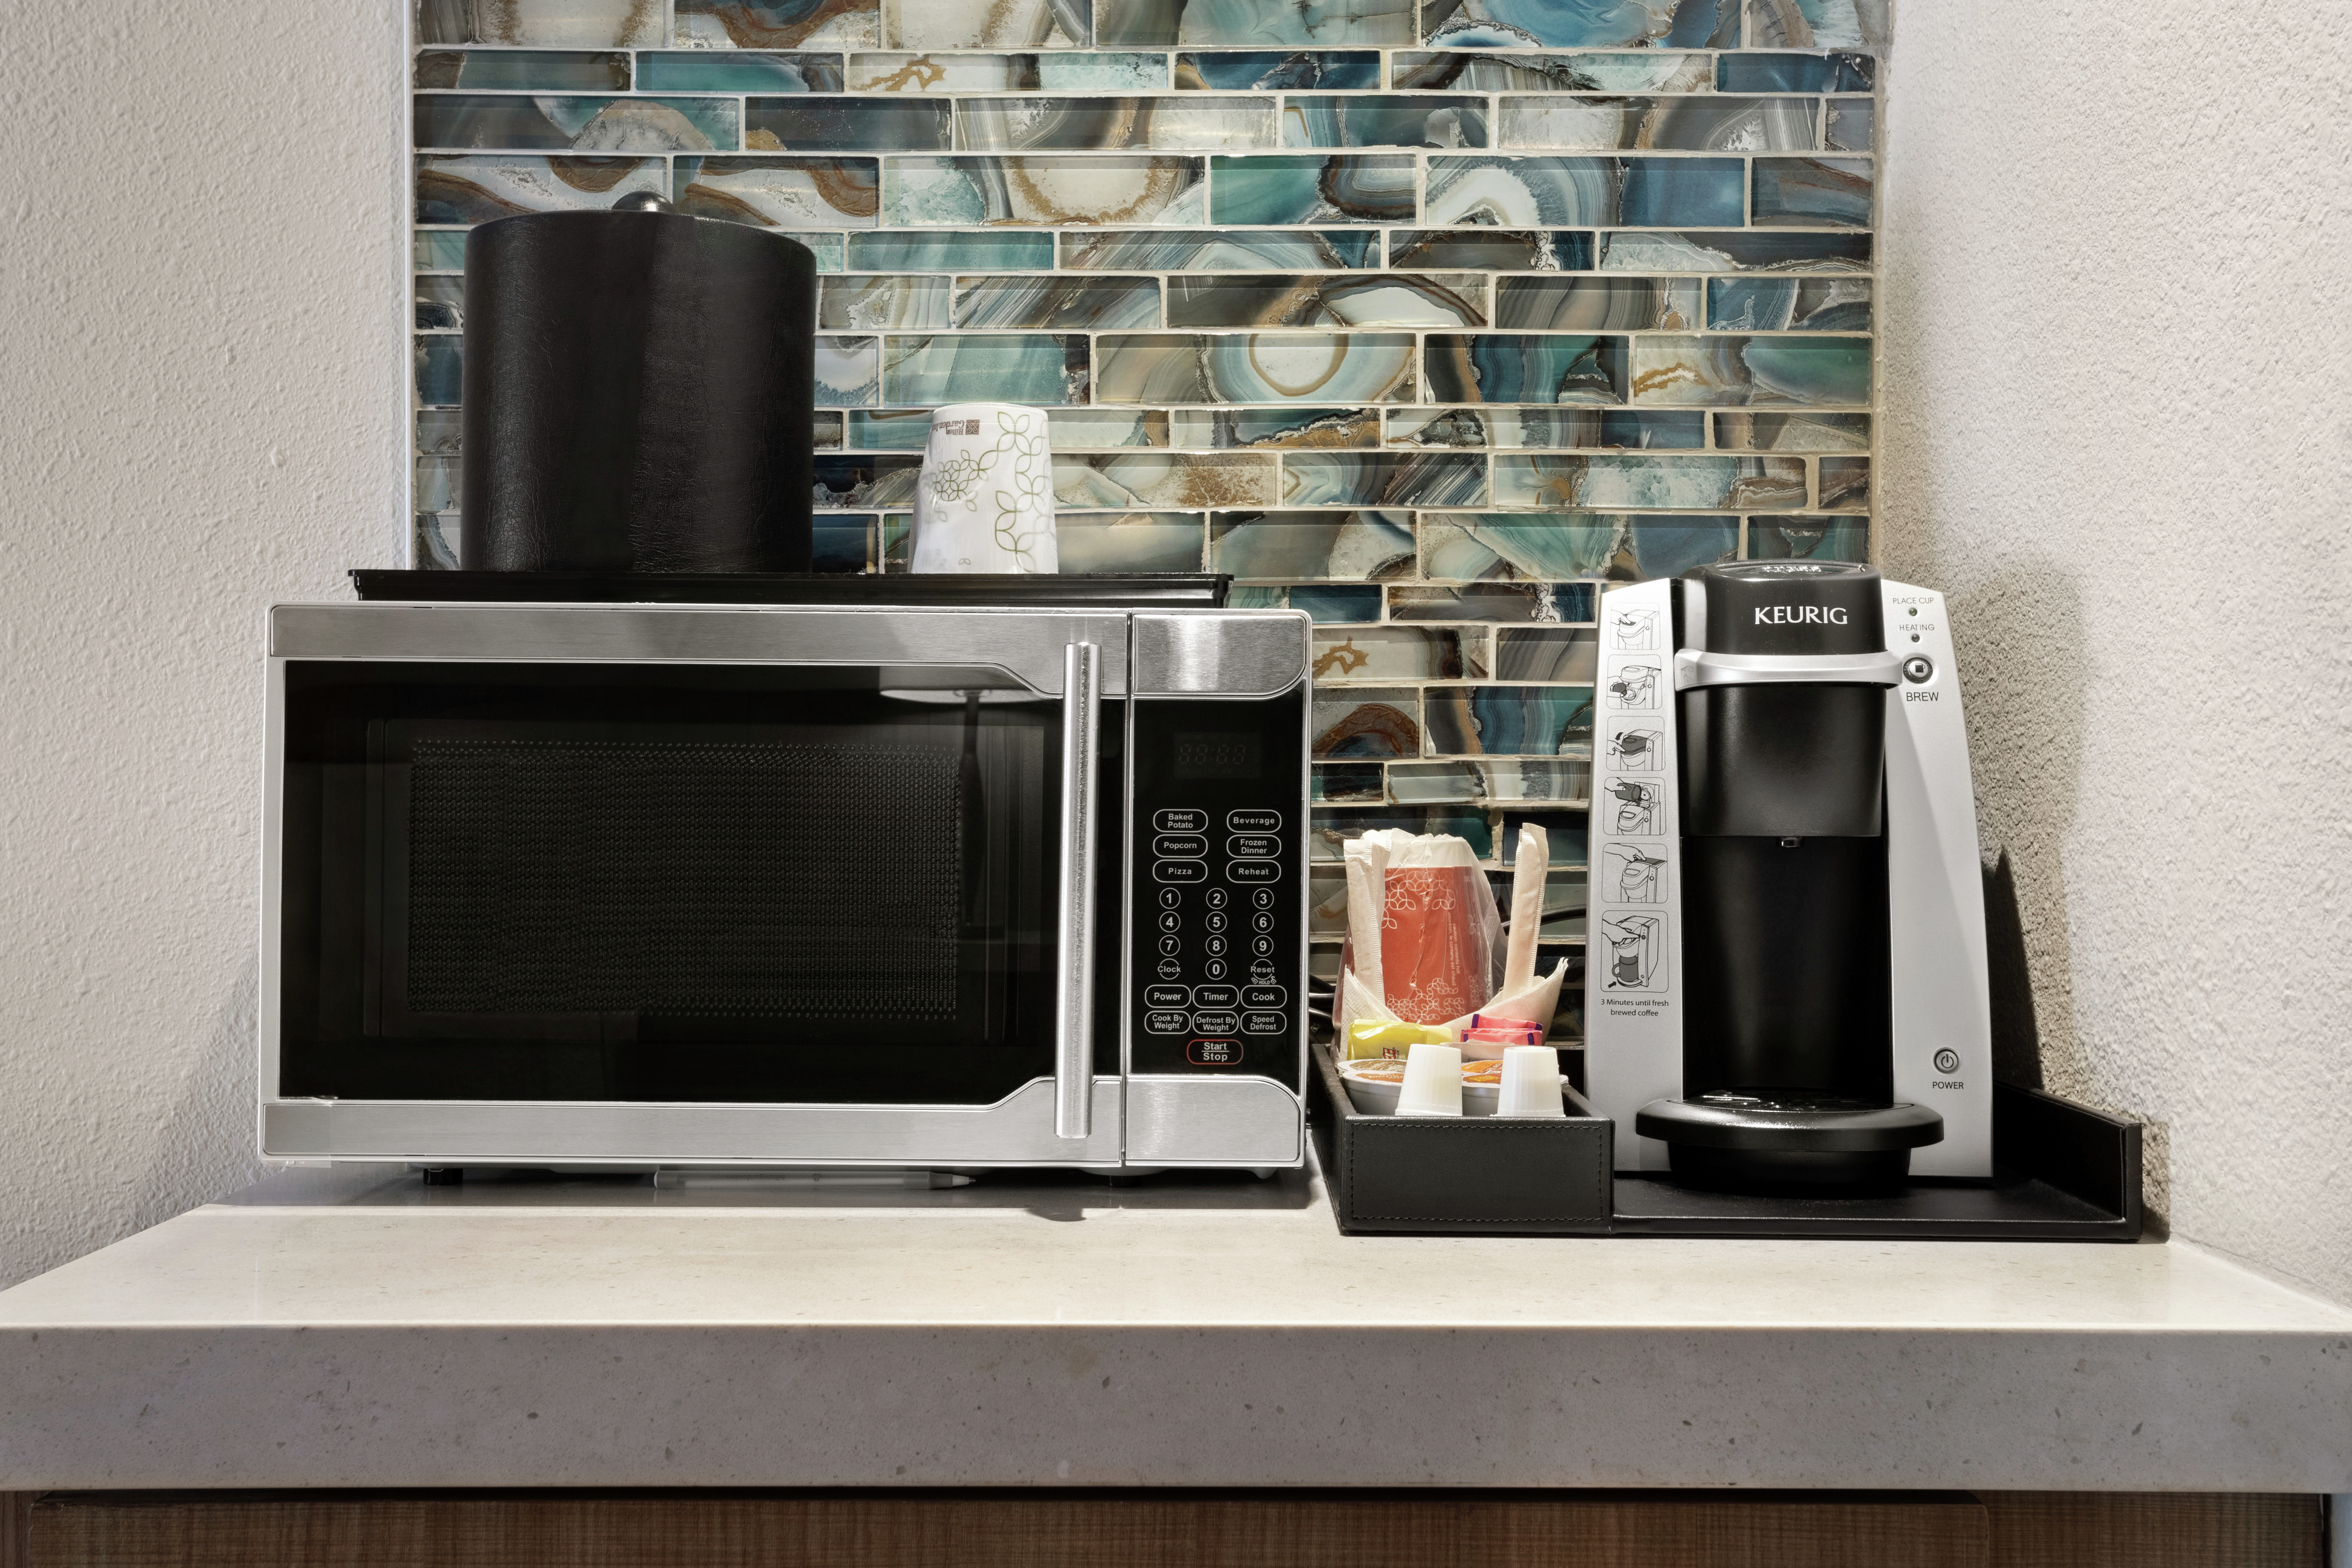 Standard Beverage Station with Coffee Maker and Microwave